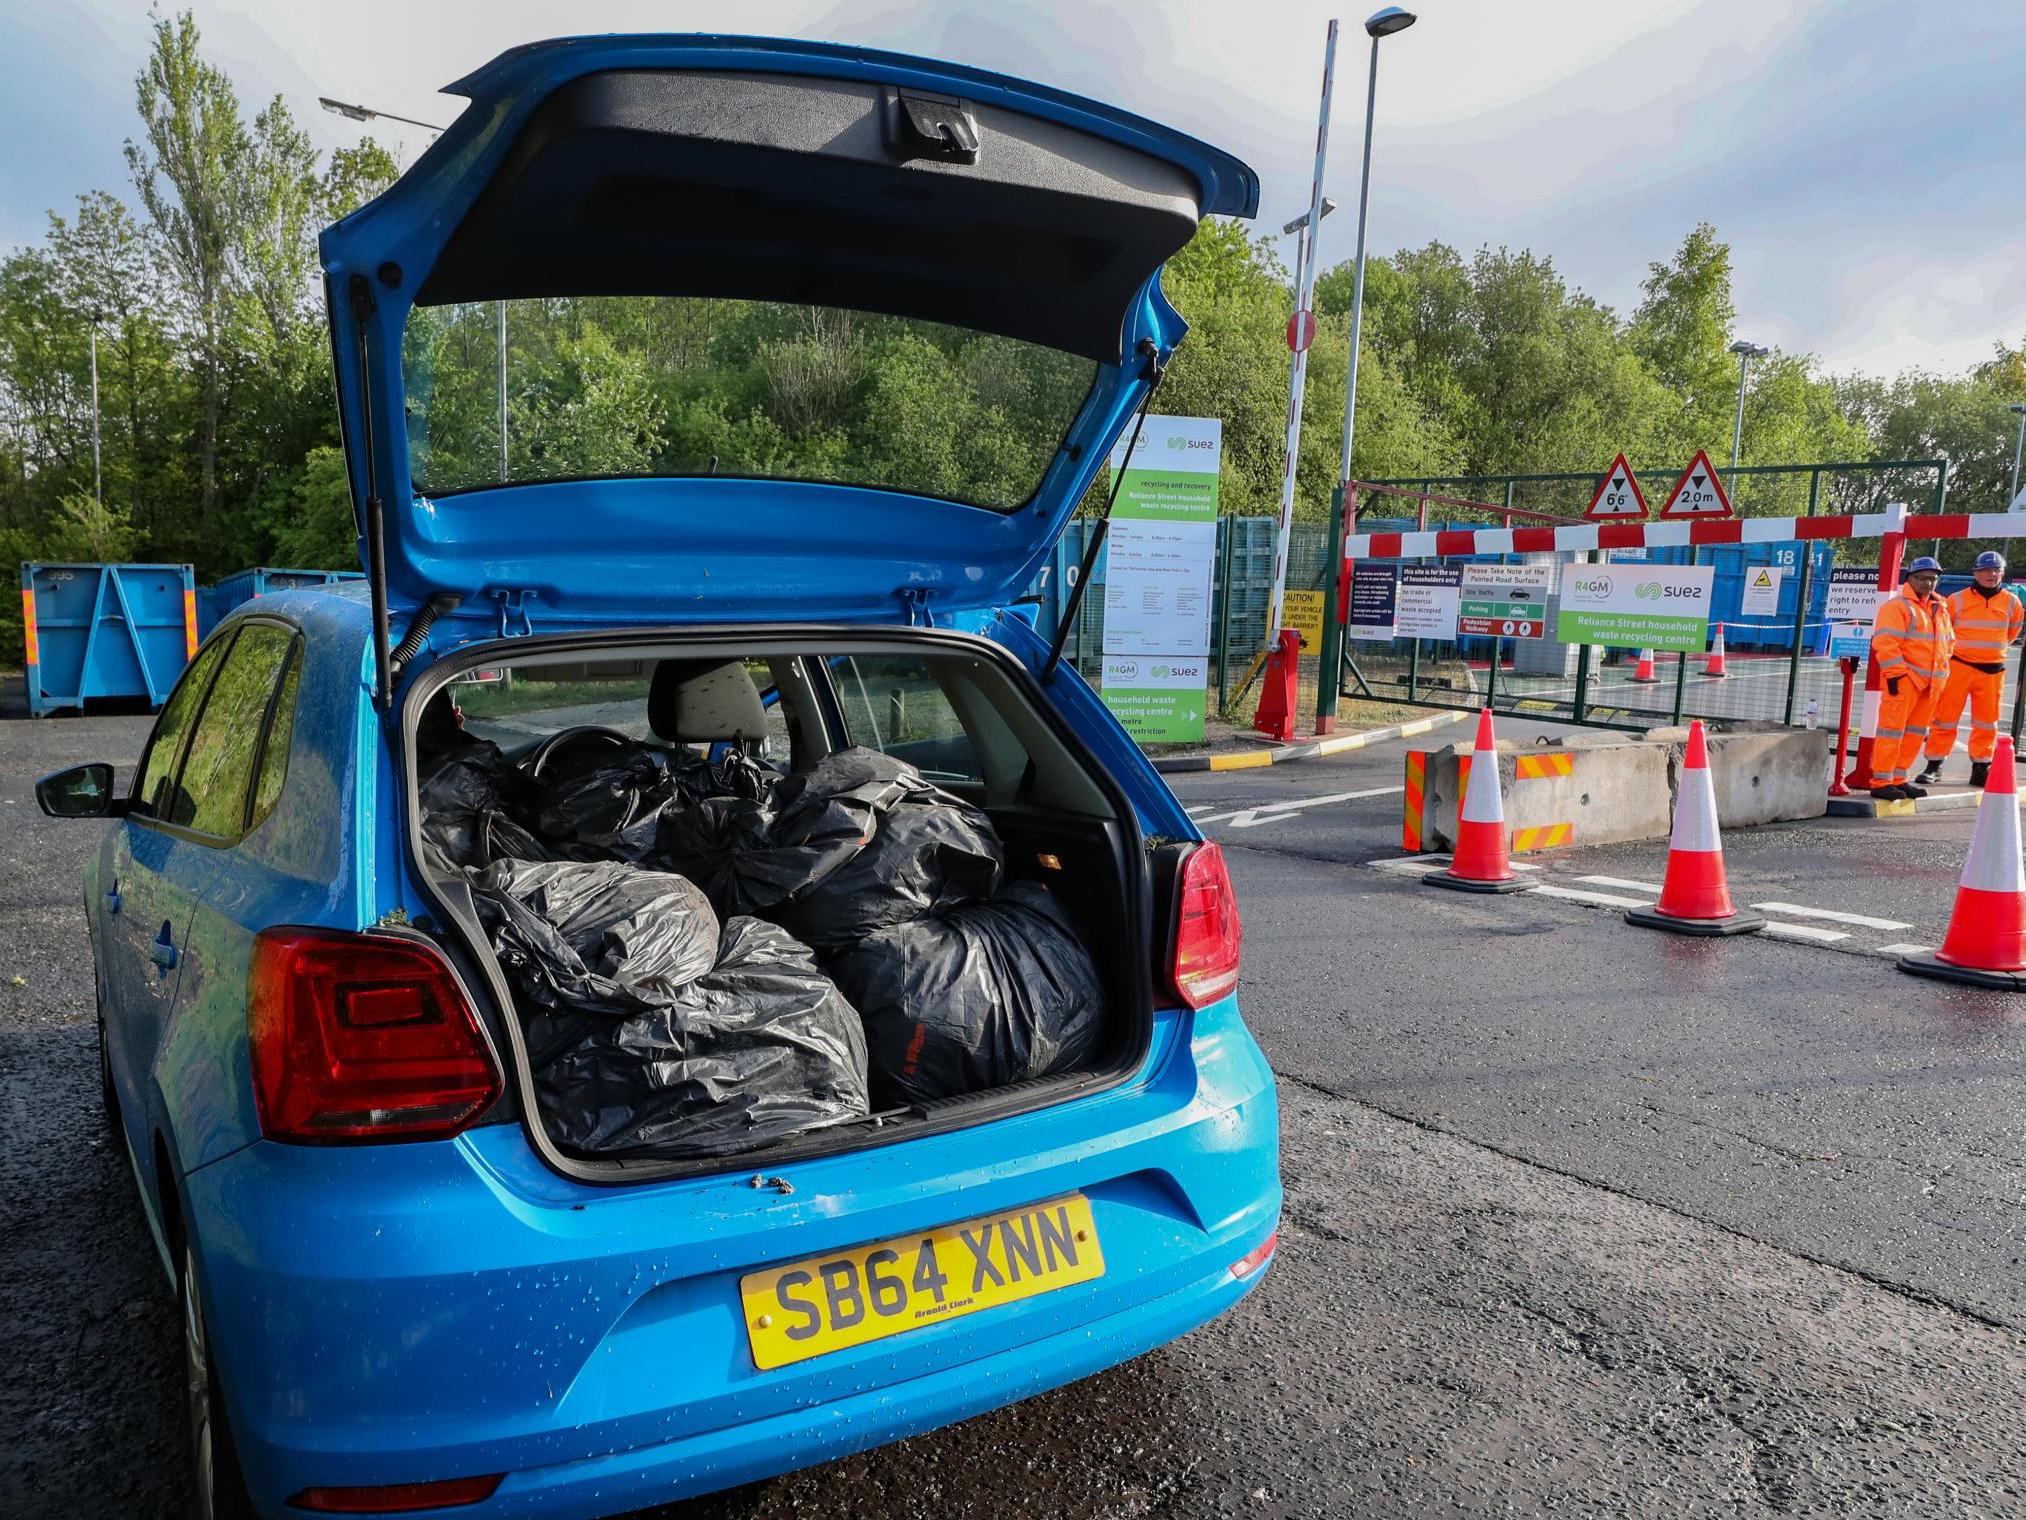 People dispose of their rubbish at a household waste recycling plant in Manchester which reopened on Saturday.